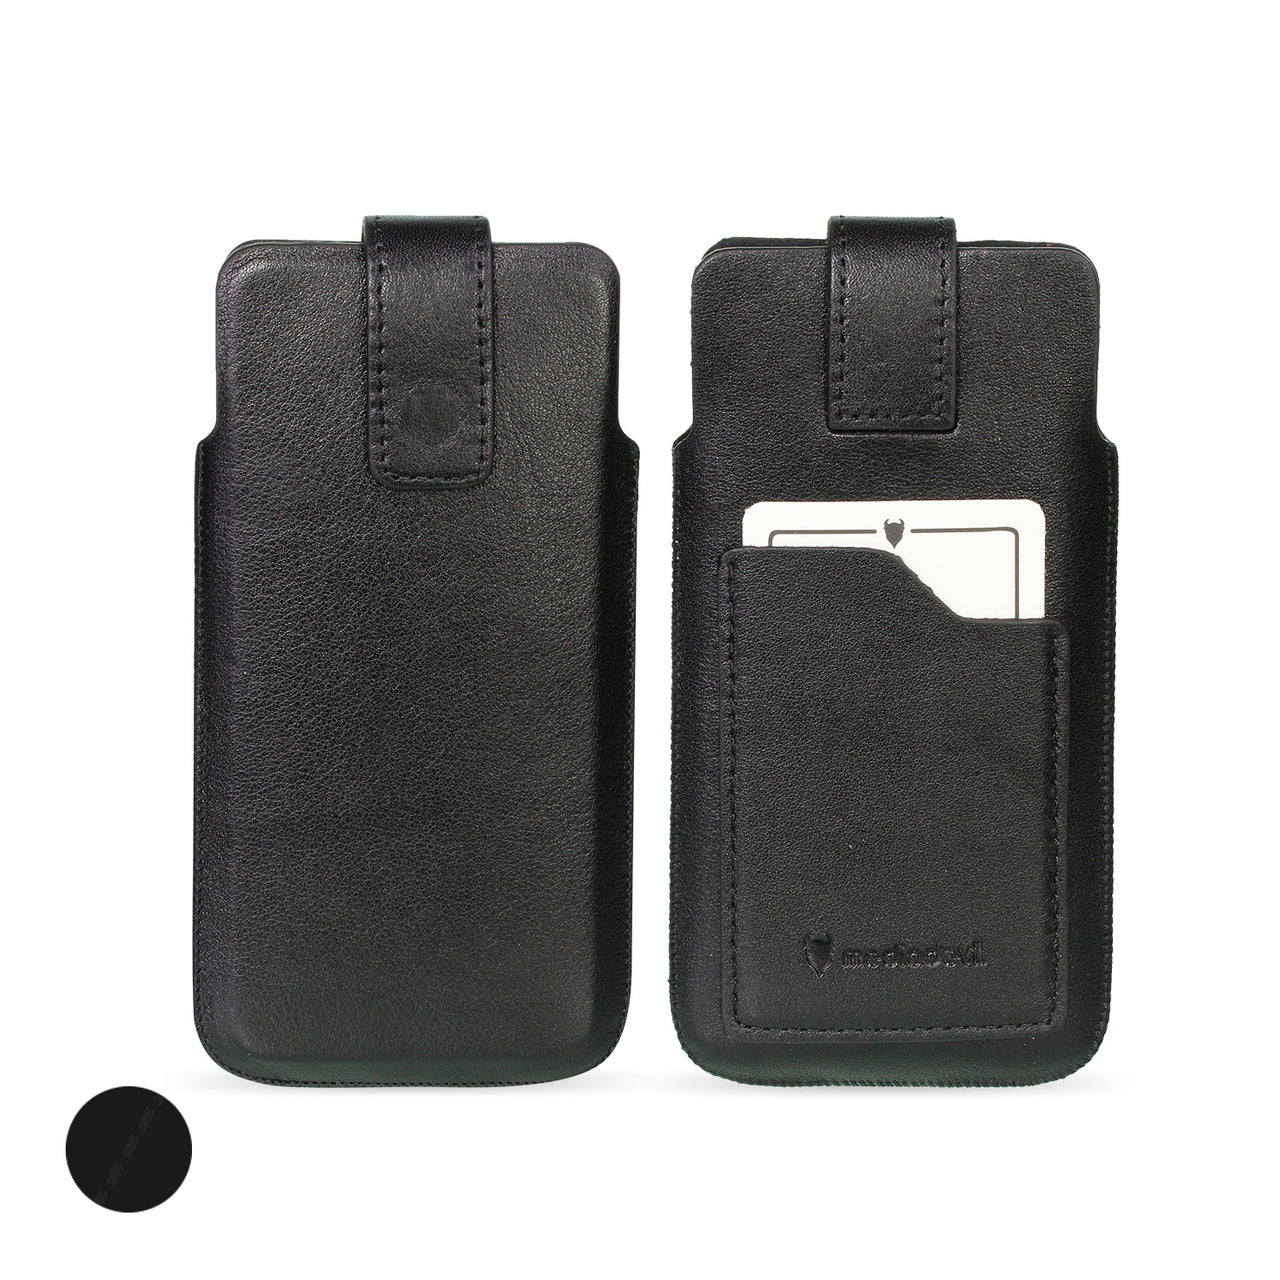 Genuine Leather Pouch Phone Case - Universal Size 1 (XS)